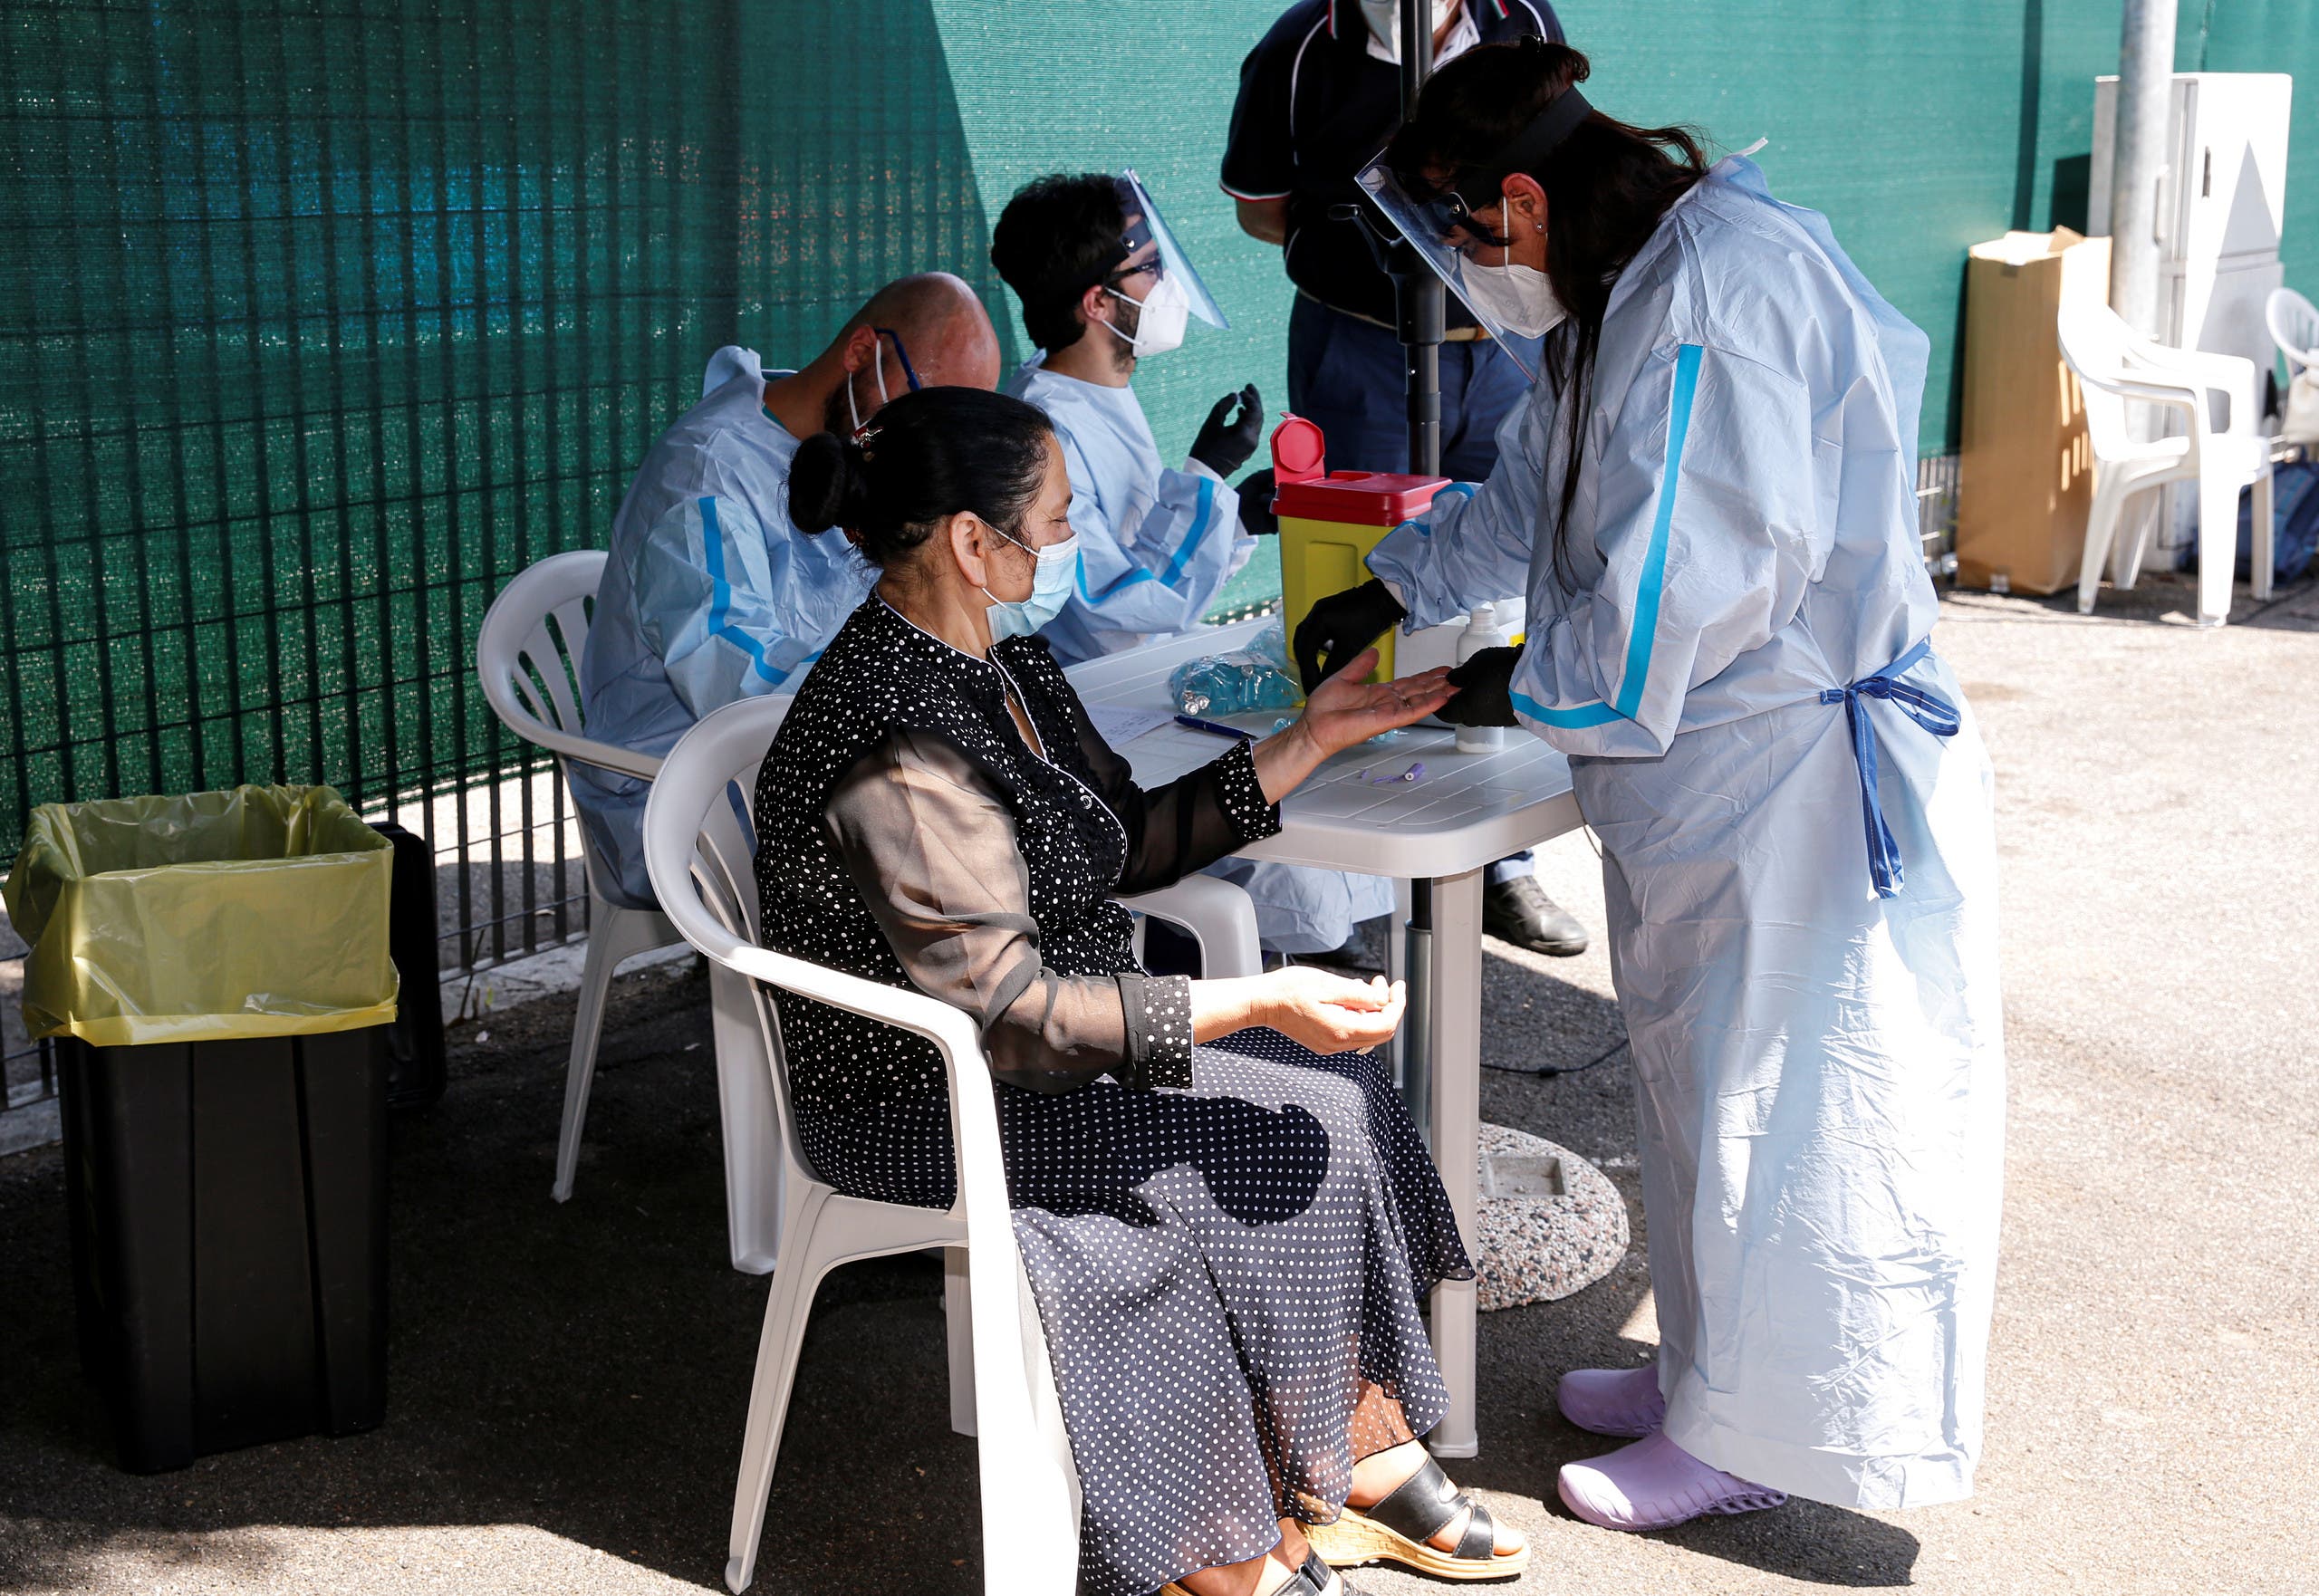 People arriving by coach from Romania take voluntary serological coronavirus disease (COVID-19) tests as part of increased security measures for 'risk' countries, in Rome, Italy. (File photo: Reuters)